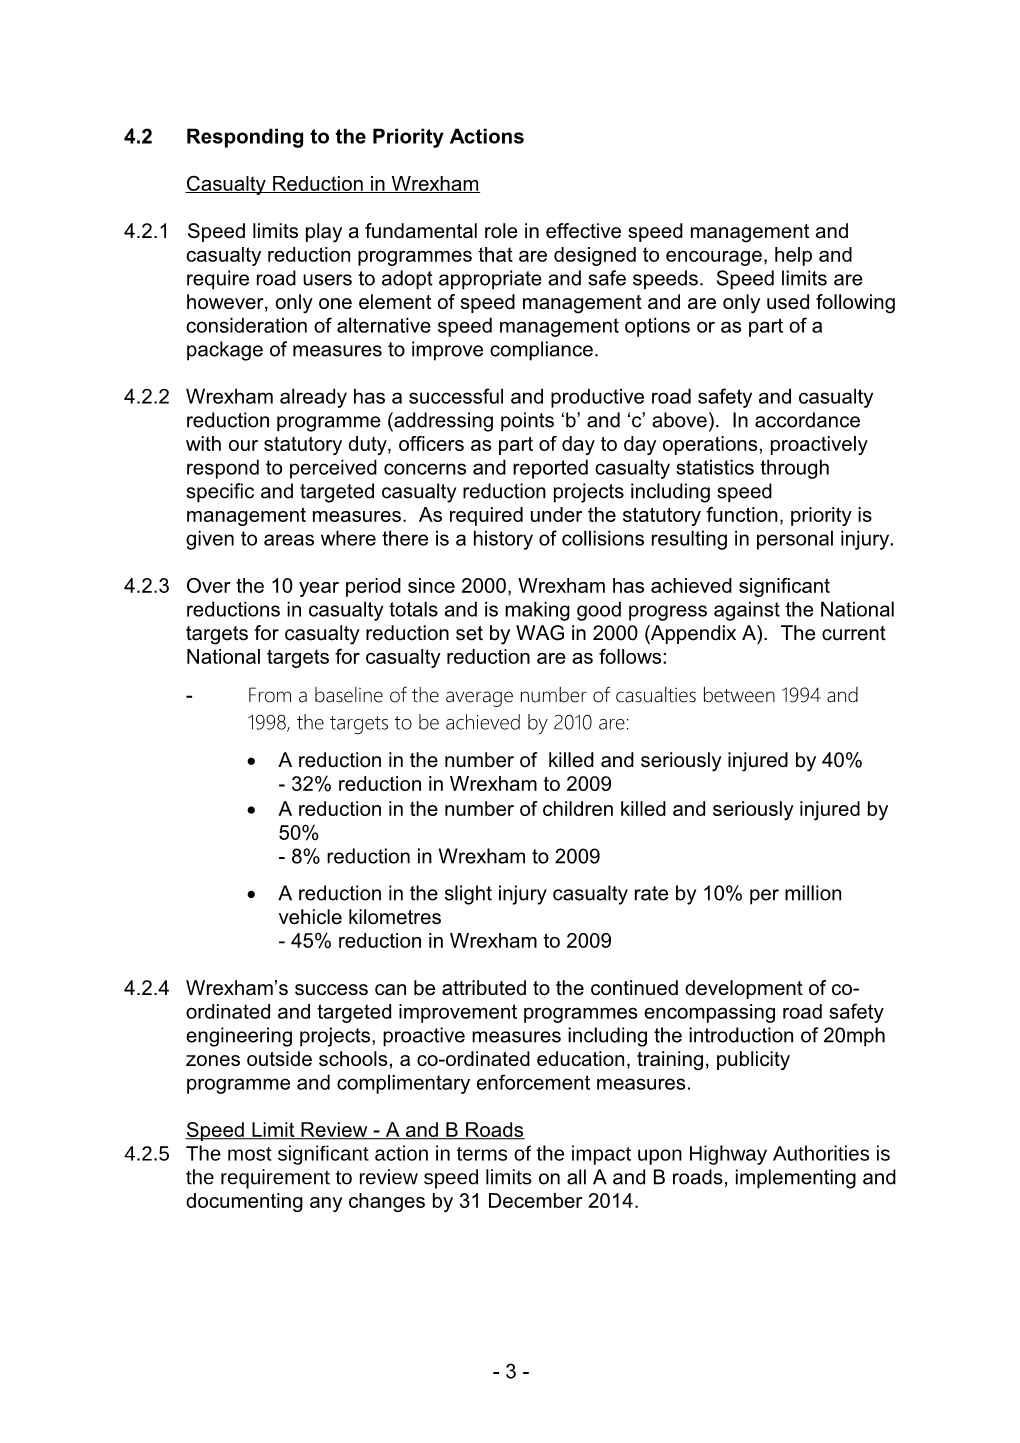 17/06/2010 Report : Environment and Regeneration Scrutiny Committee